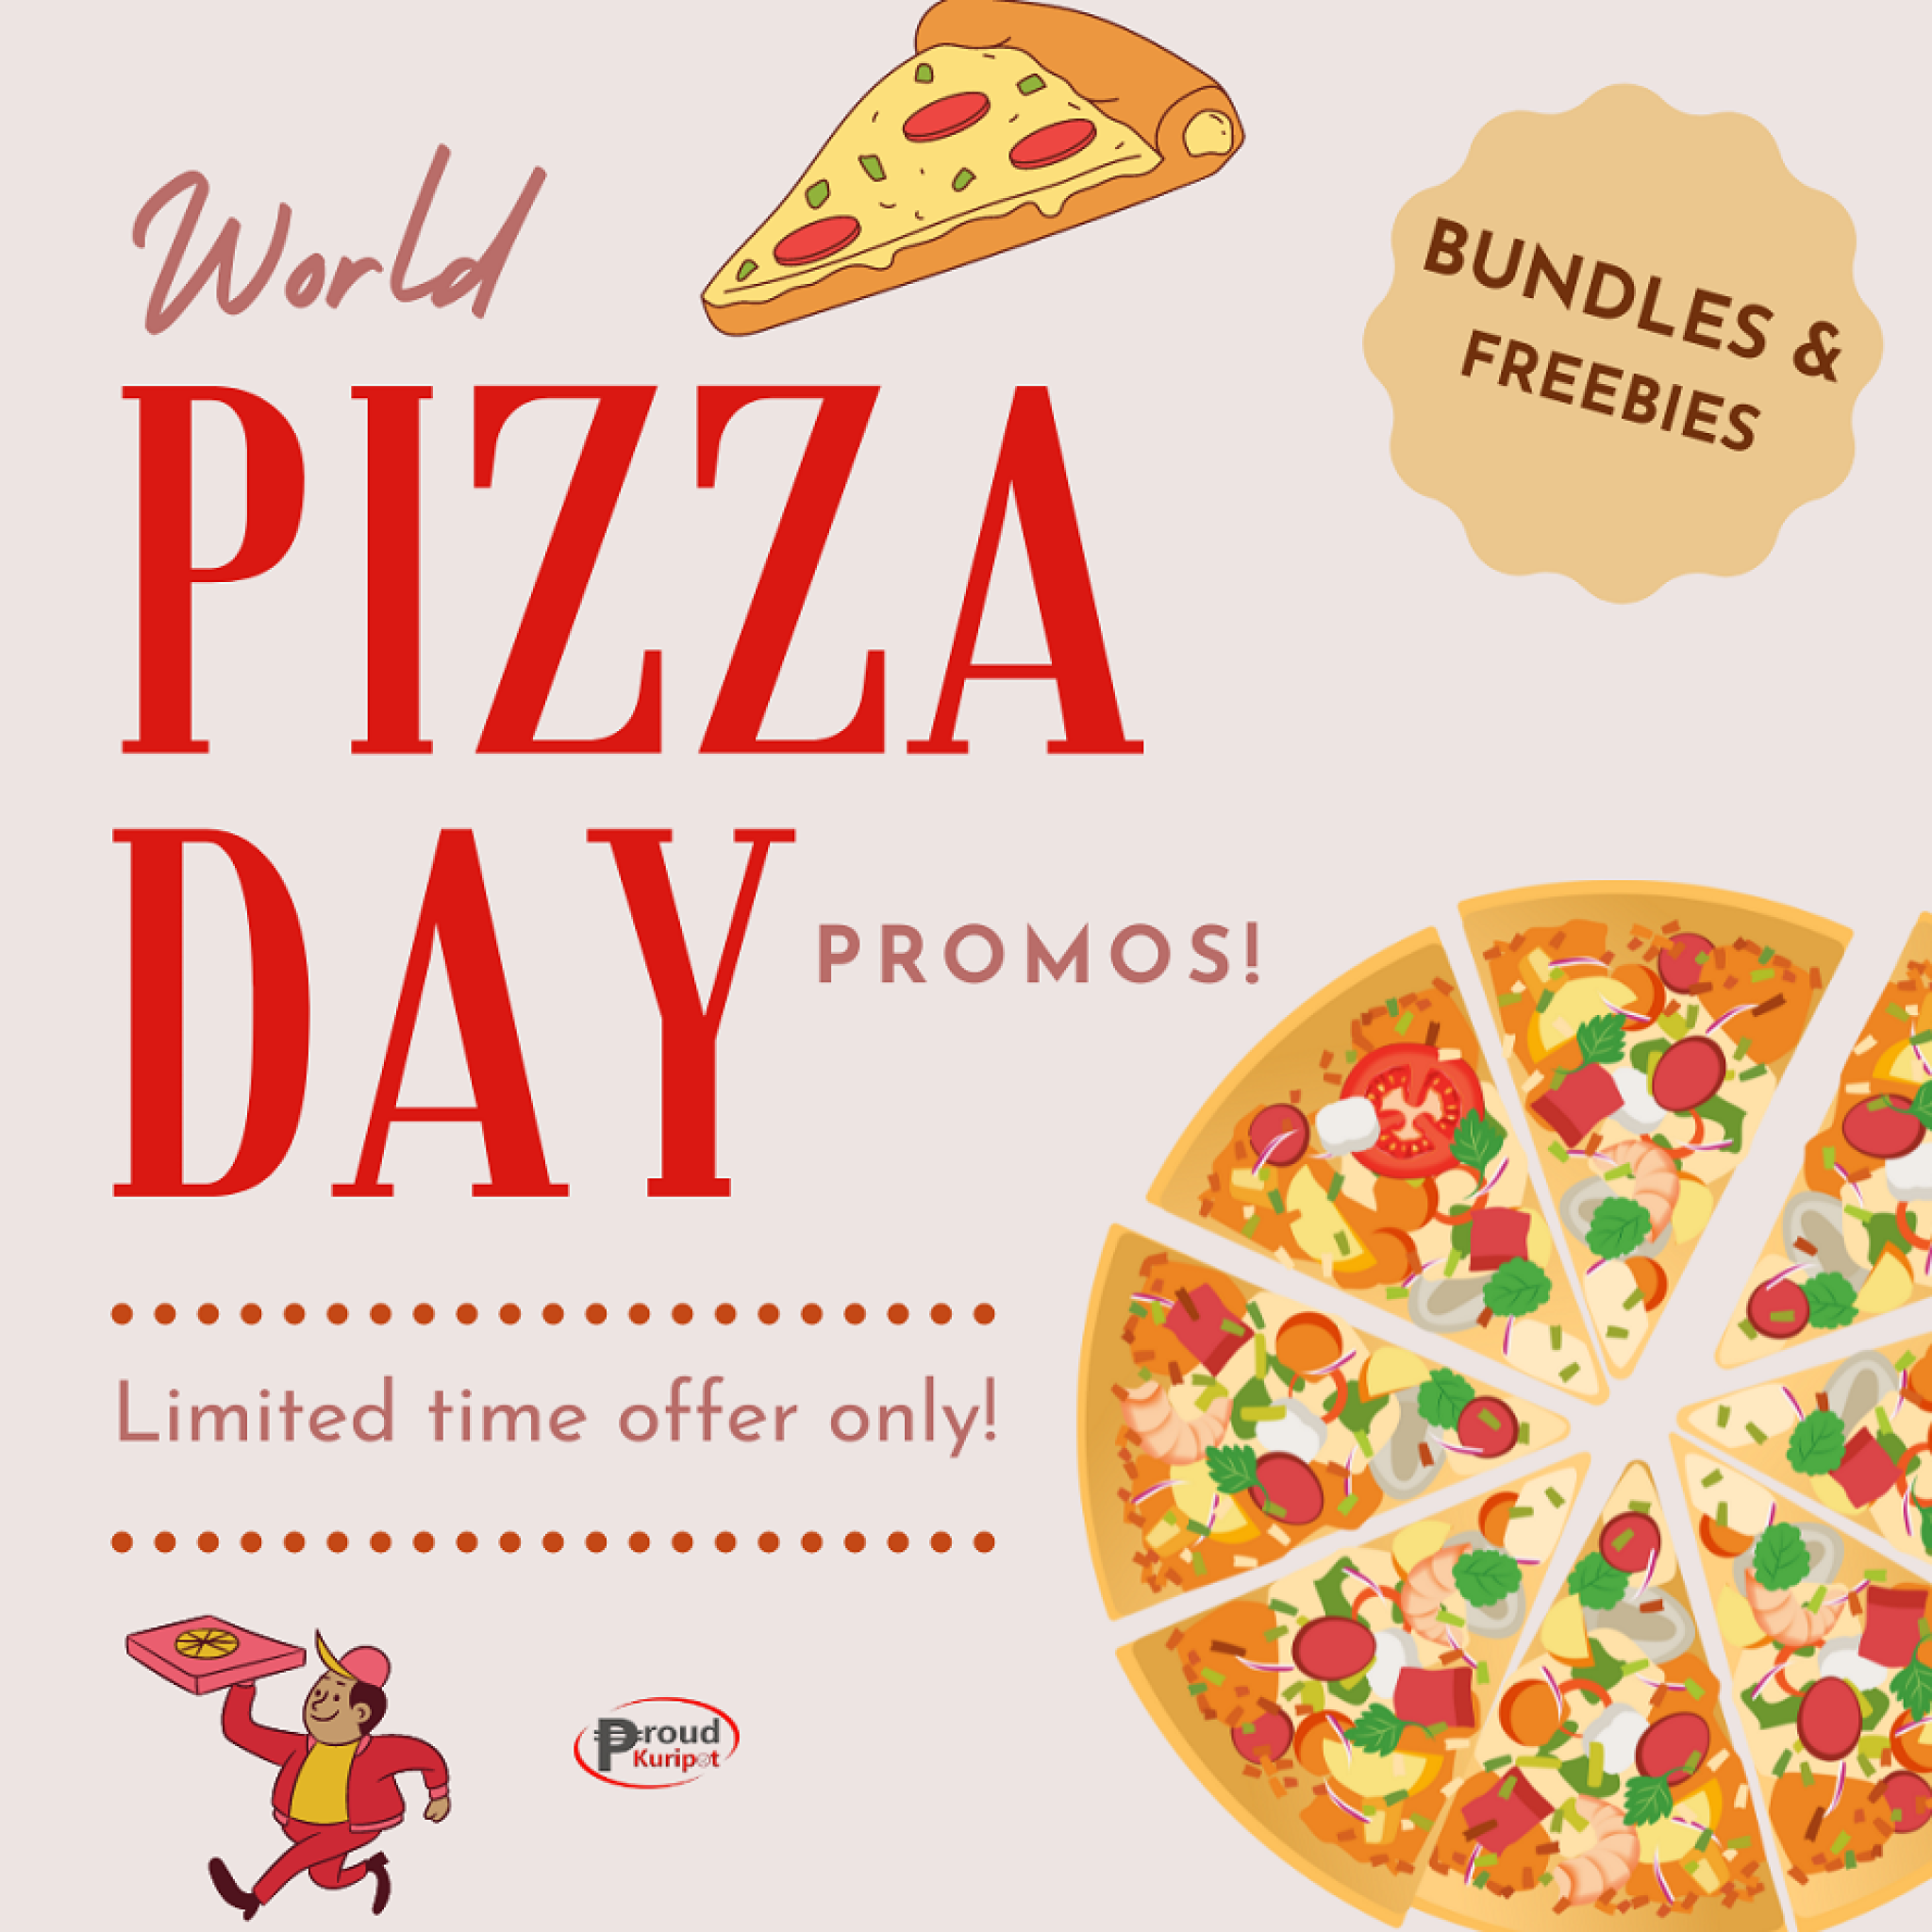 Piping Hot List of World Pizza Day Promos for 2023 PROUD KURIPOT